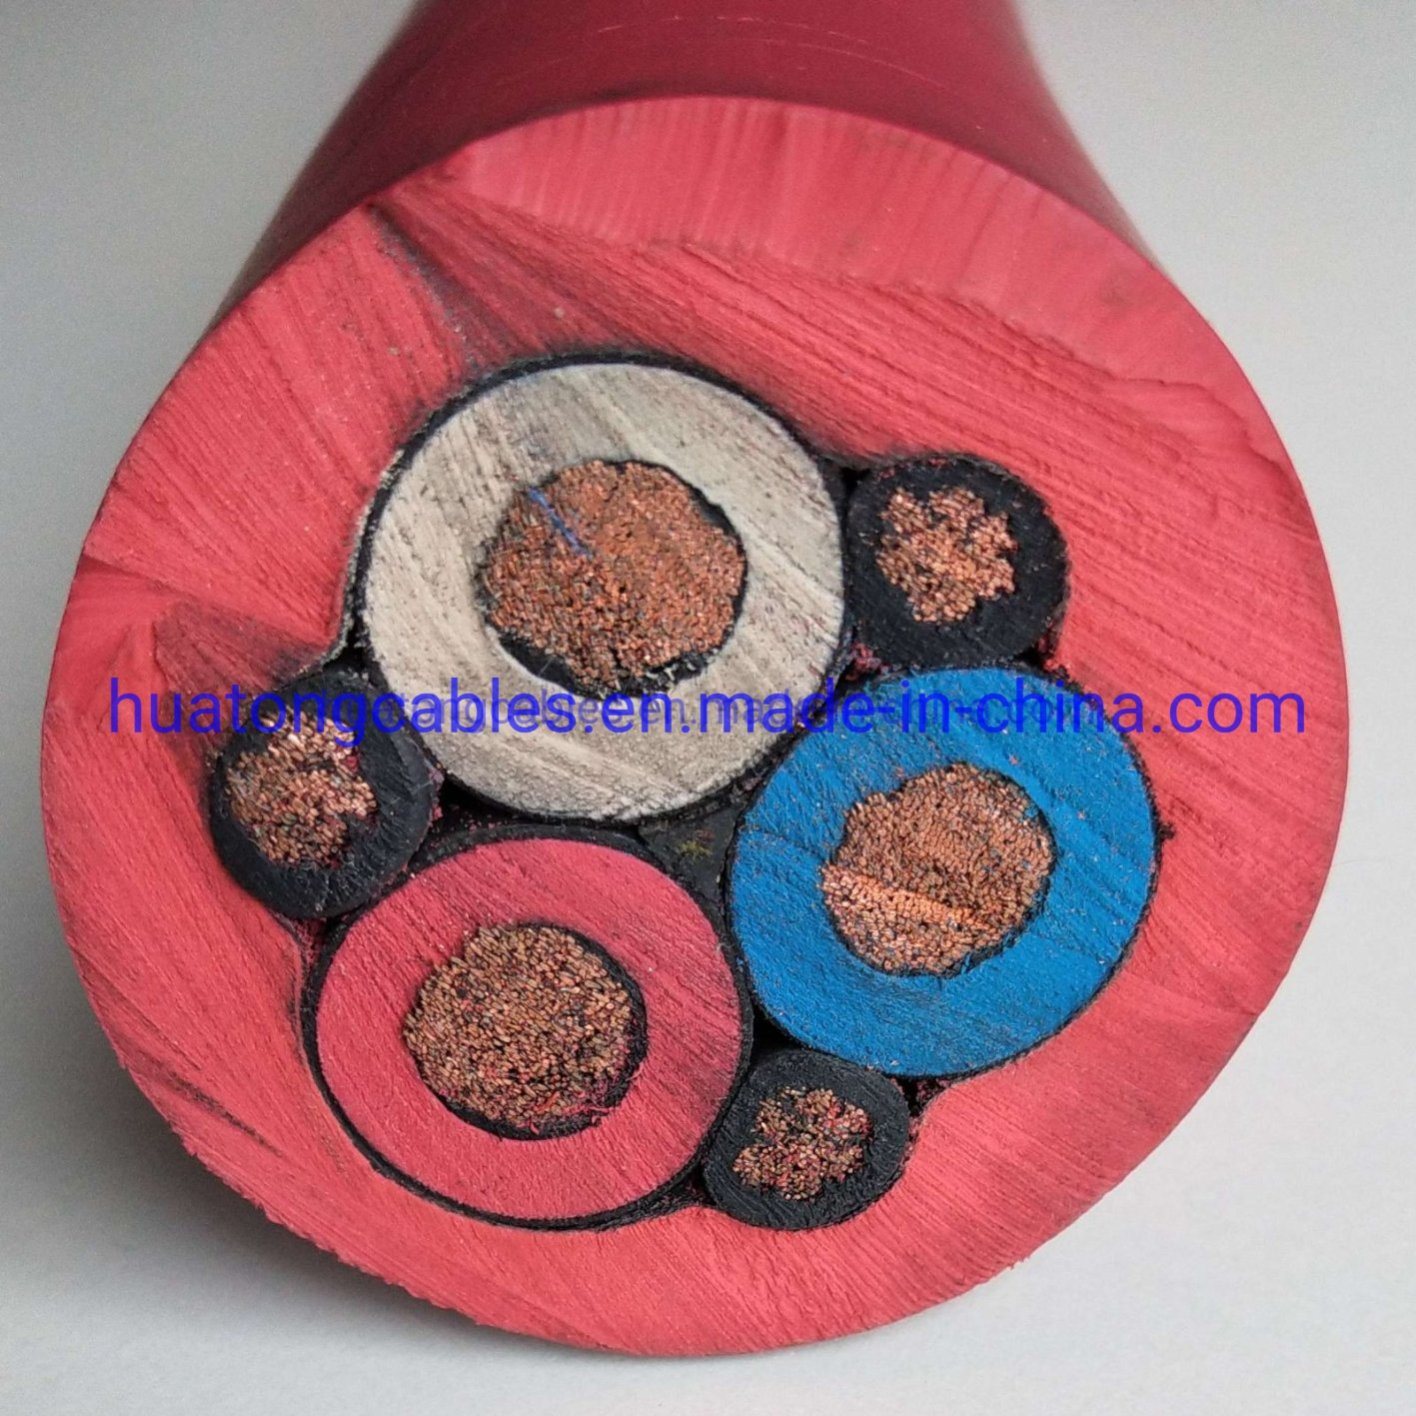 Type Shd-Gc Mining Cable 3 Conductor 350 Mcm 15kv EPDM Insulation CPE Sheath Red Color Industrial Mining/Trailing Cable with UL Certificate